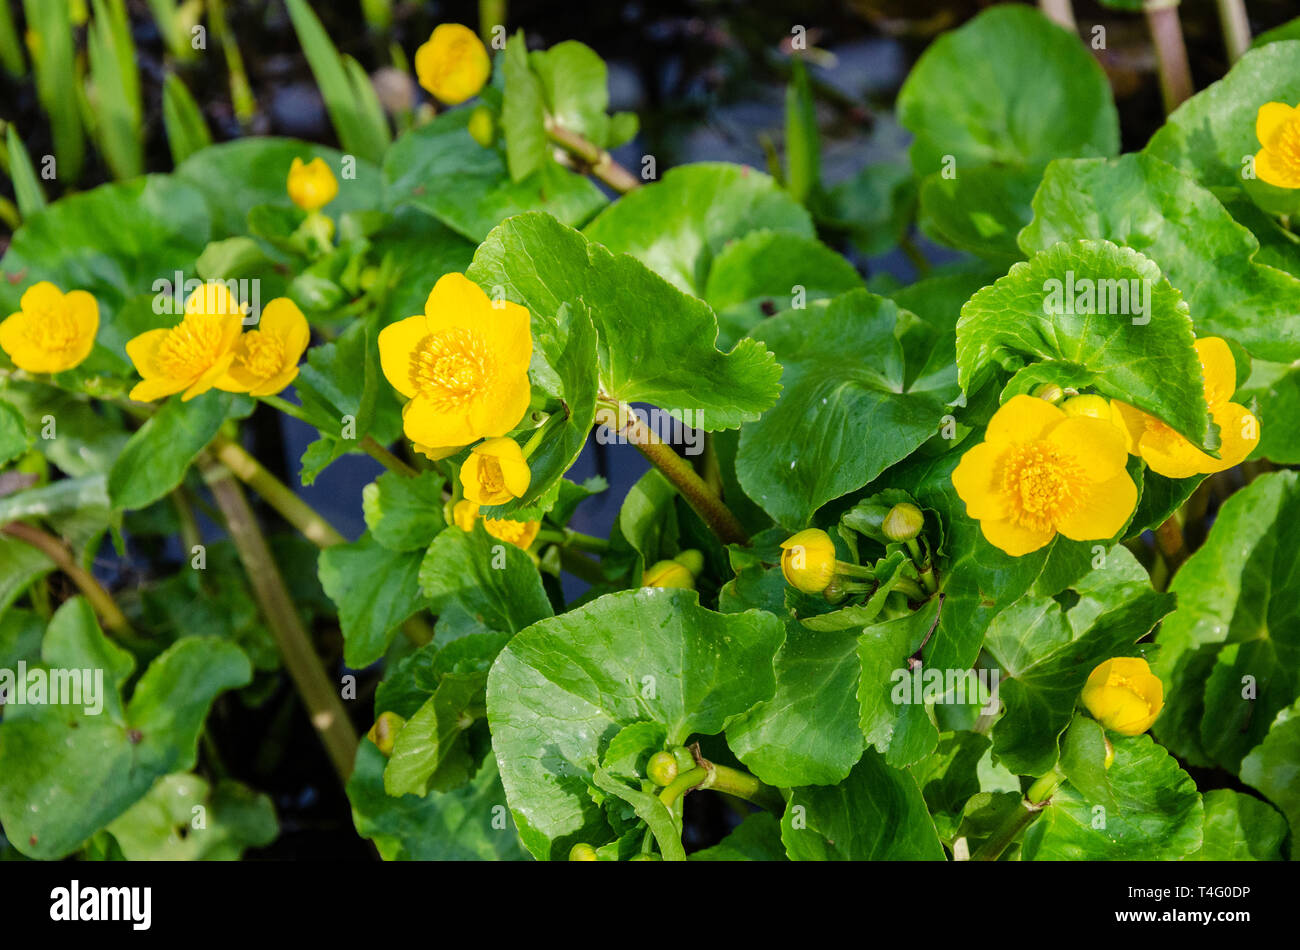 Marsh Marigold flowers, yellow in early spring. Close up view of the plant growing at the edge of a garden pond. Stock Photo